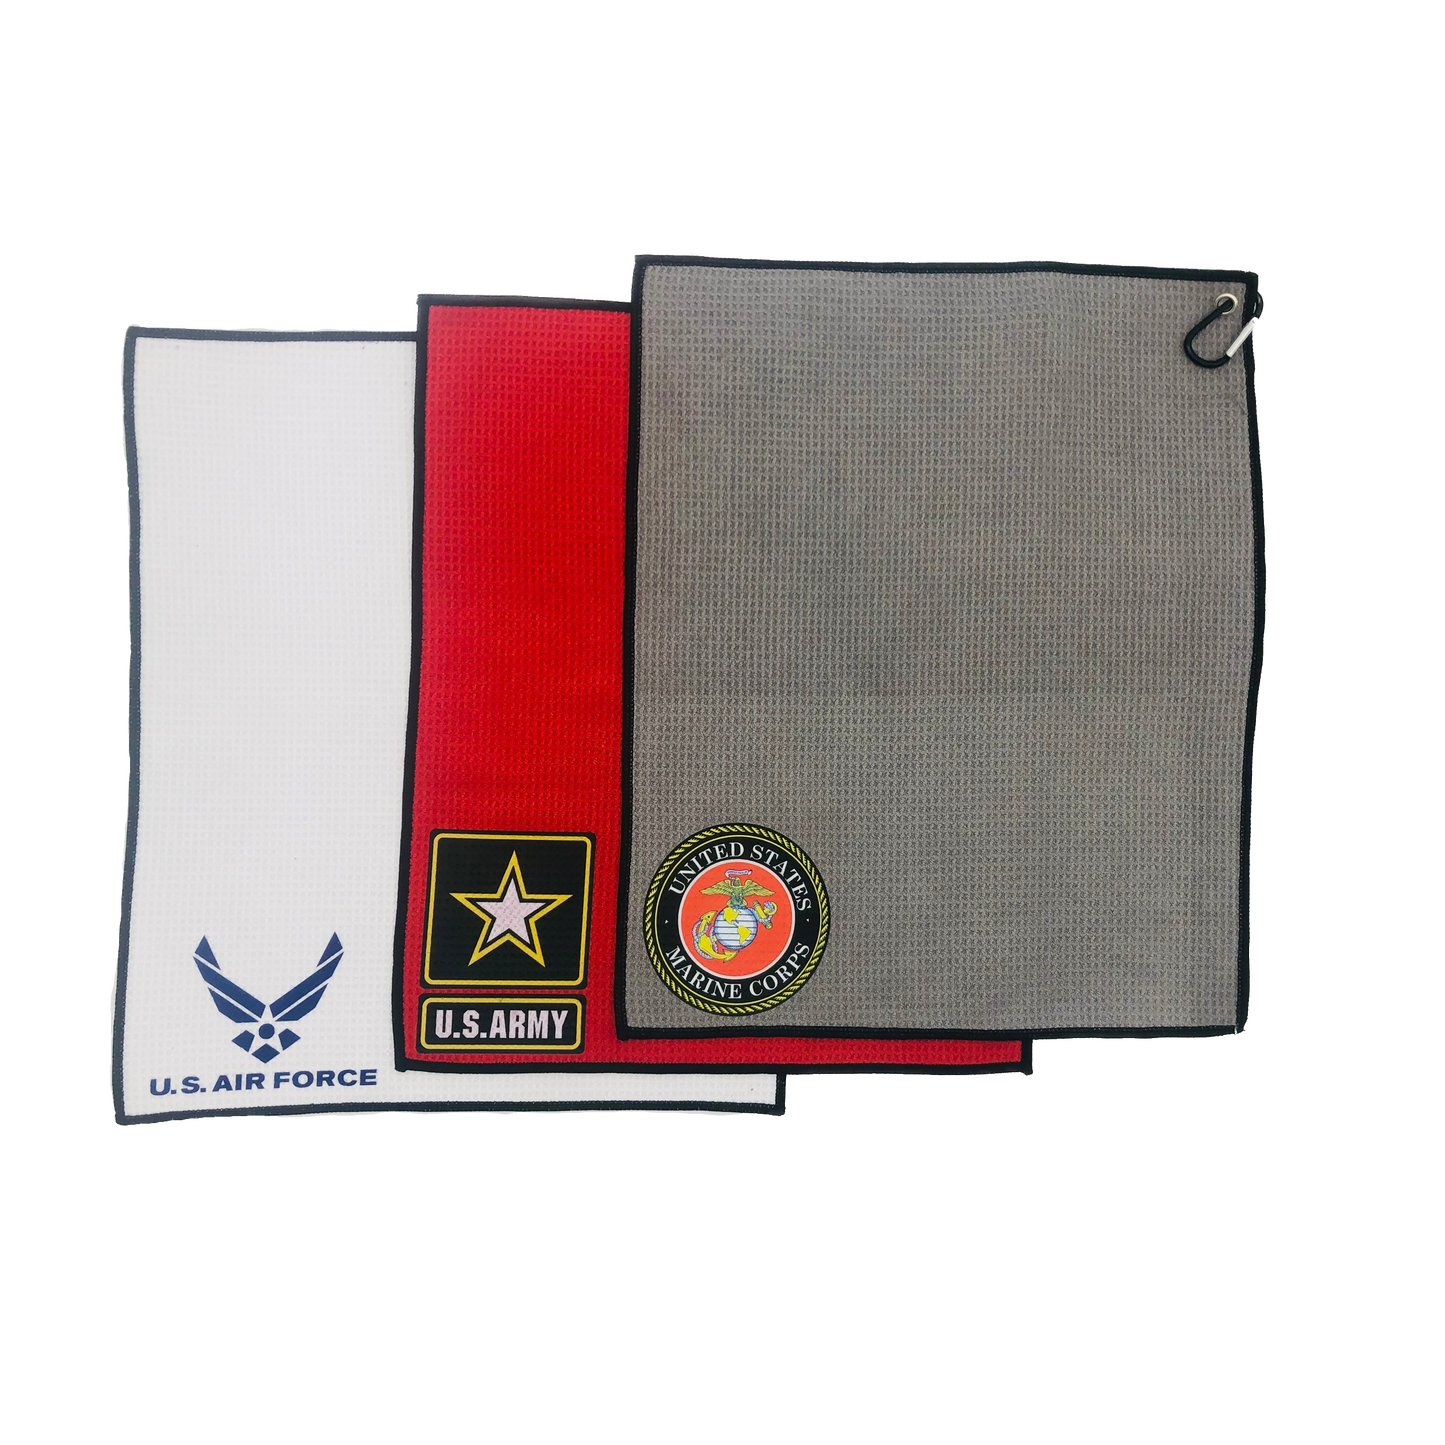 15" x 18" towel with Military Logos